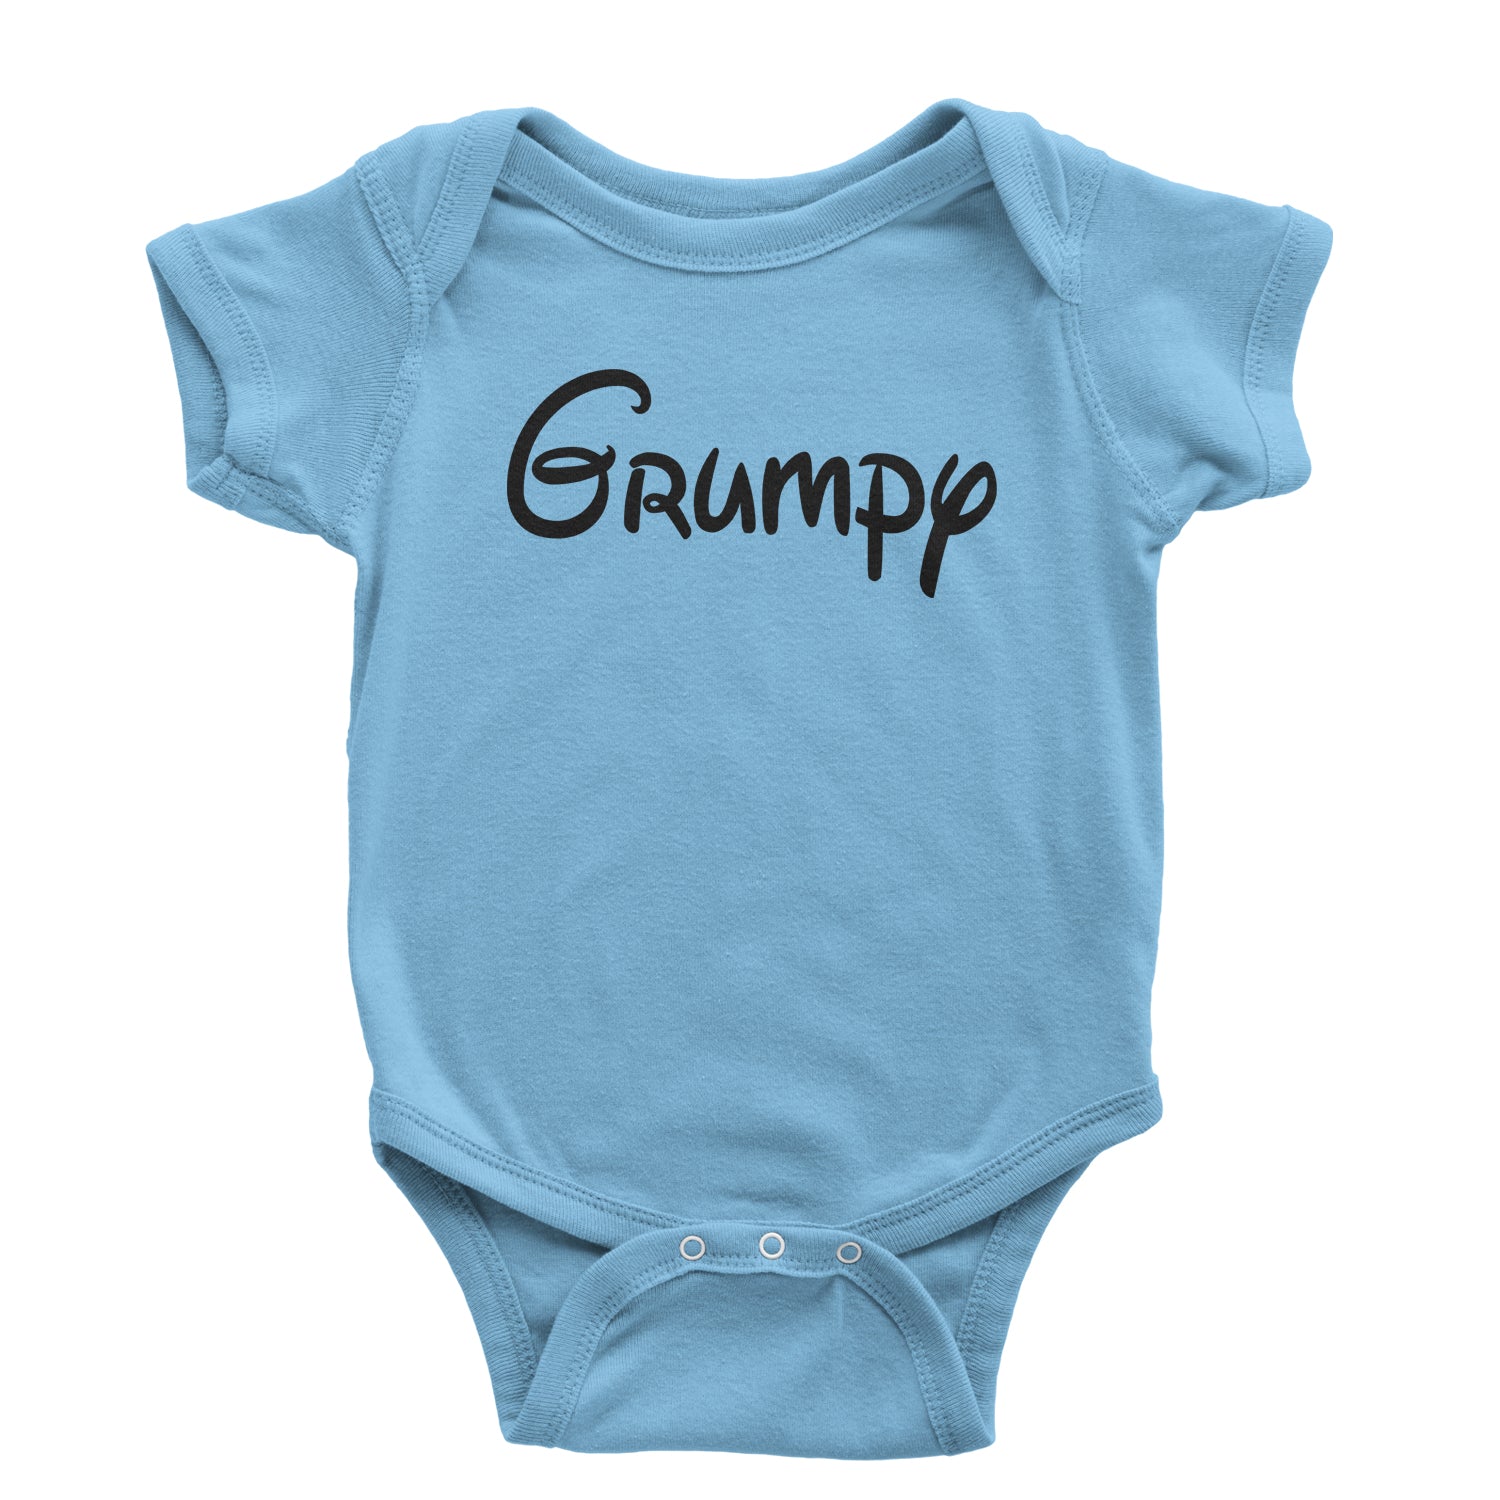 Grumpy - 7 Dwarfs Costume Infant One-Piece Romper Bodysuit and, costume, dwarfs, group, halloween, matching, seven, snow, the, white by Expression Tees